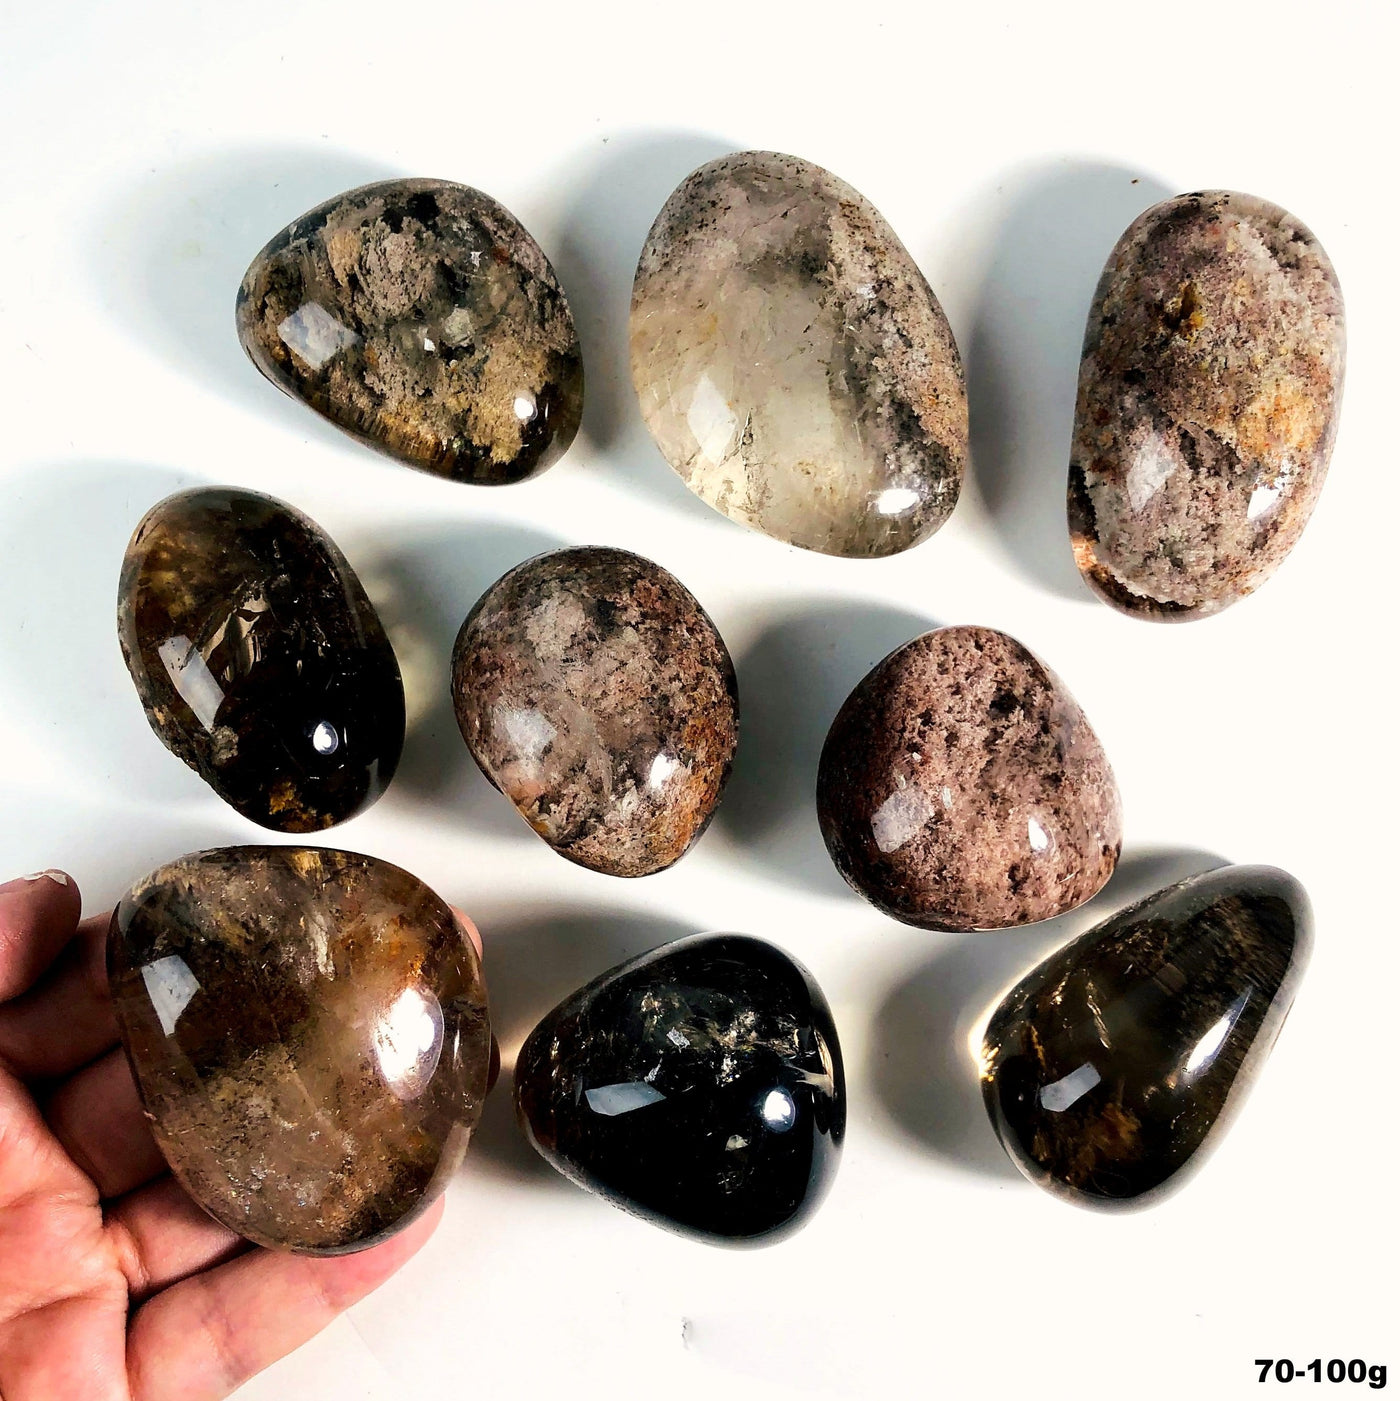 Lodolite tumbled stone assortment on a white background with one held in a man's hand.